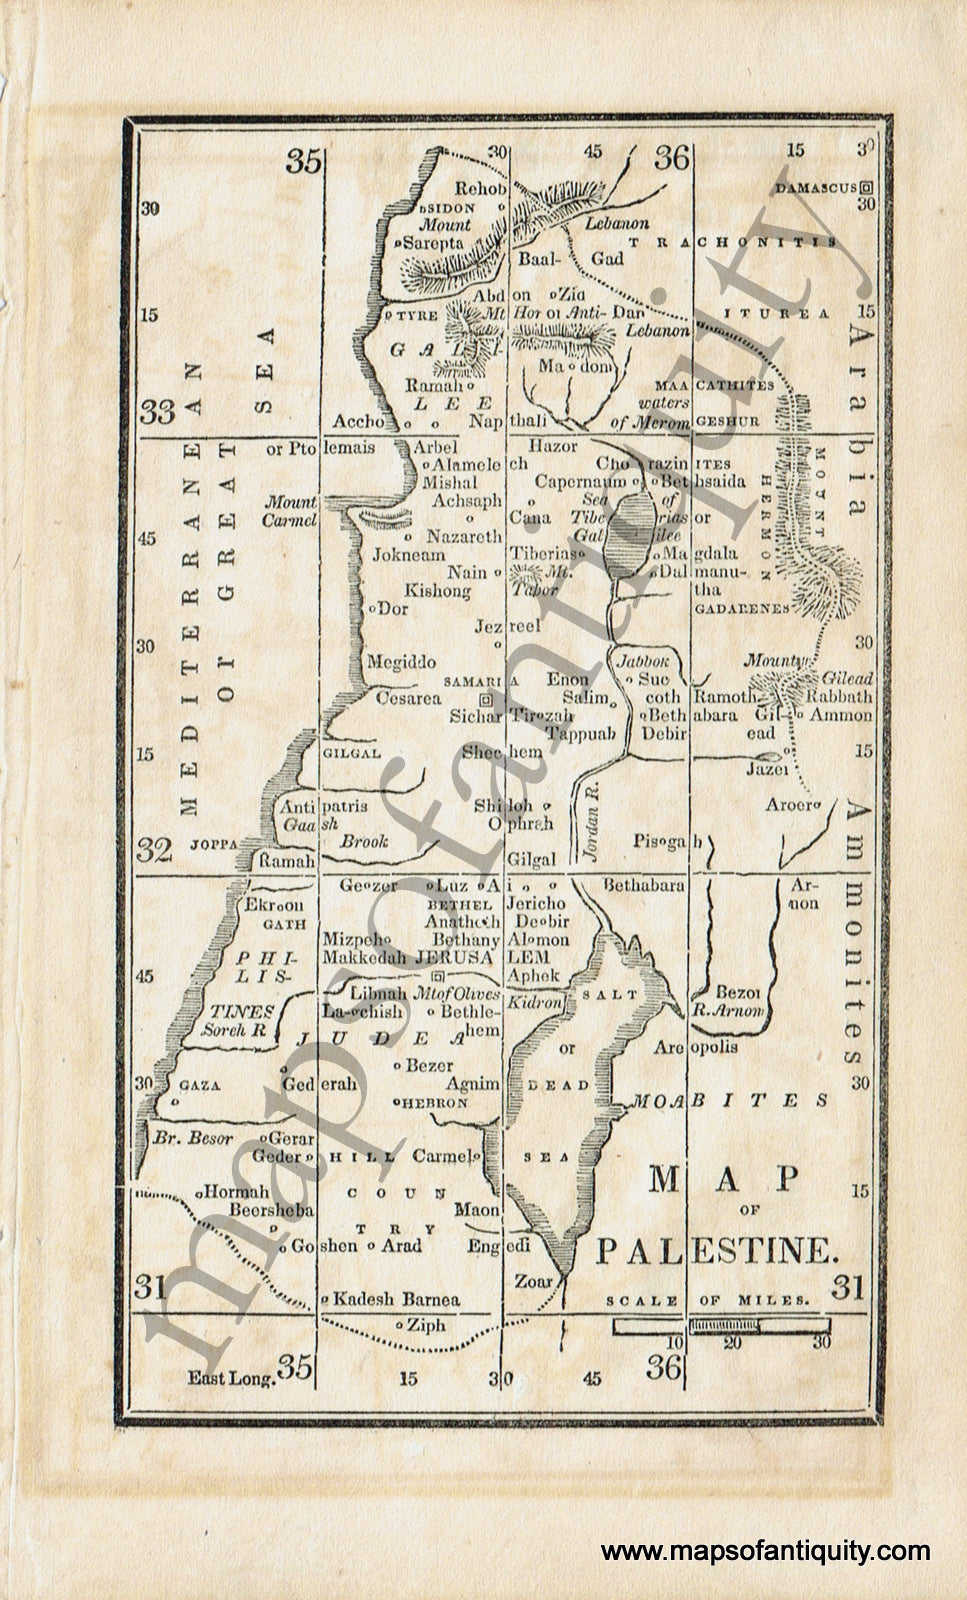 Antique-Black-and-White-Map-Map-of-Palestine-Middle-East-&-Holy-Land--1830-Boston-School-Geography-Maps-Of-Antiquity